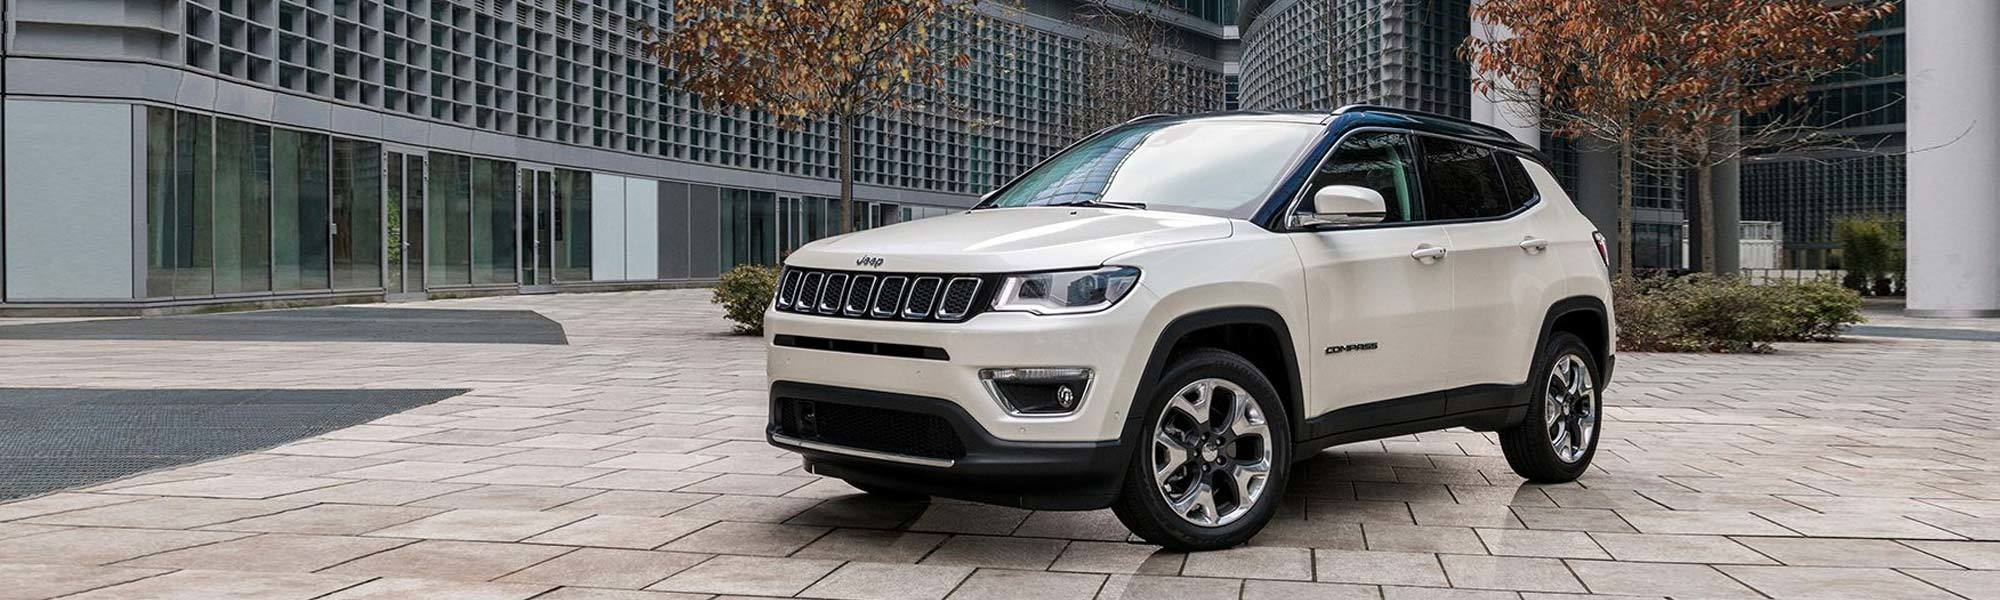 New Jeep Compass Interior Features In Northampton At